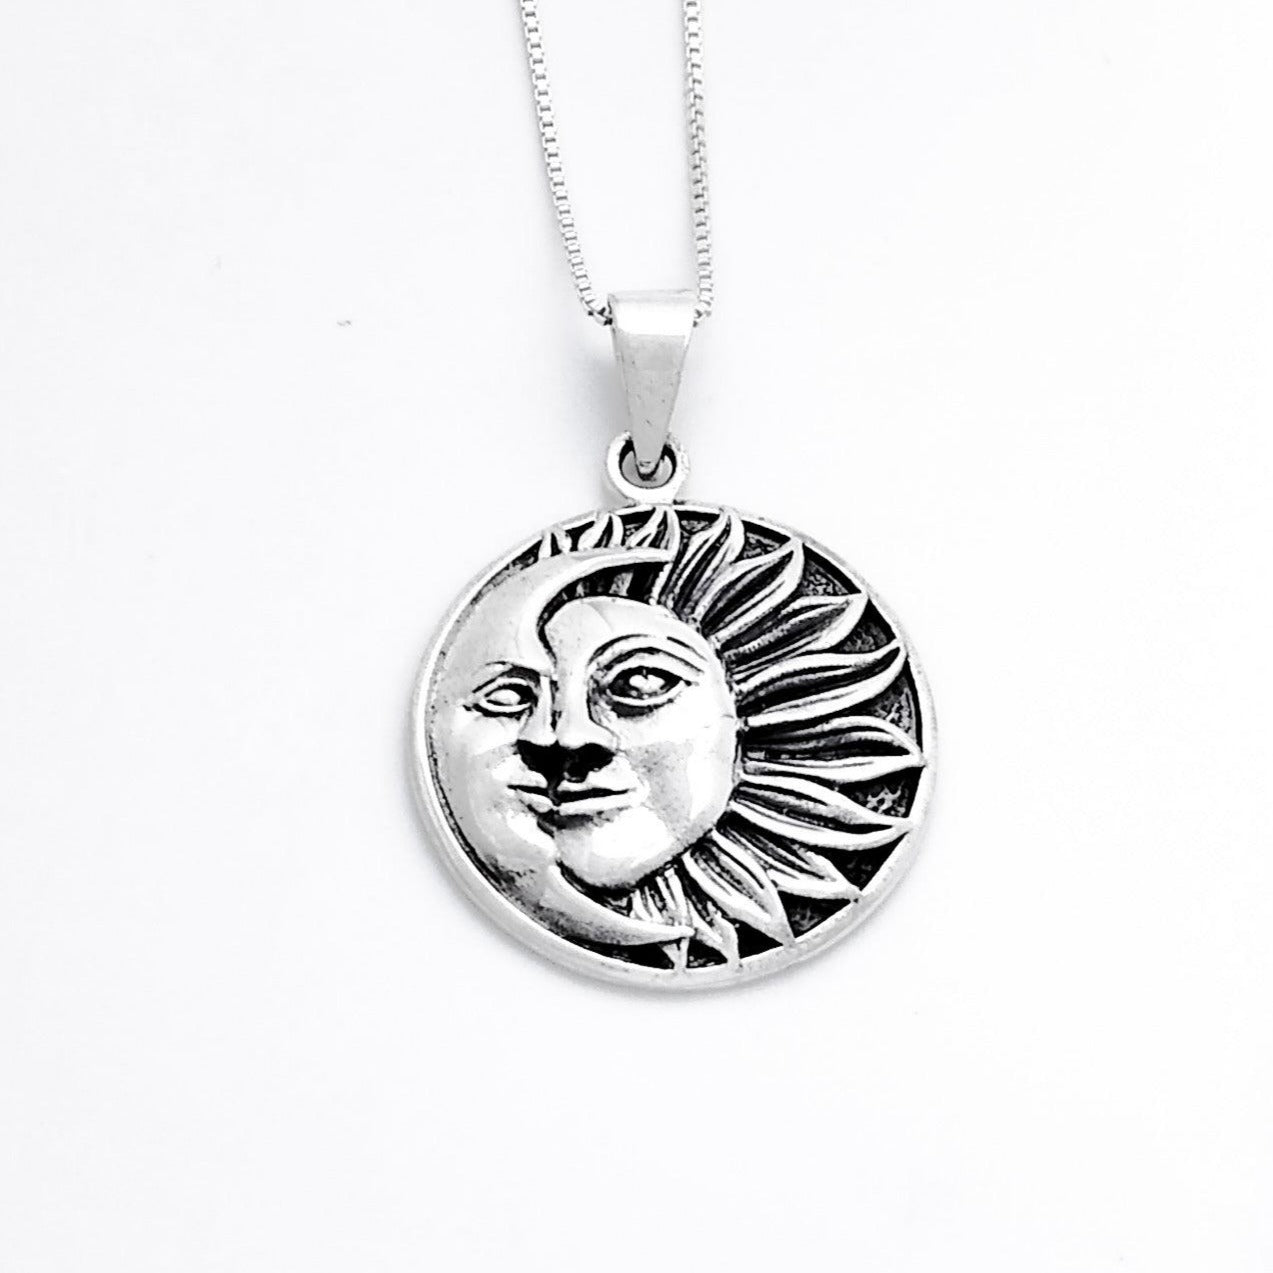 A circular pendant of a half sun with a face and 13 flower-petal-like rays extending to the right. A crescent moon with a face covers the left side.